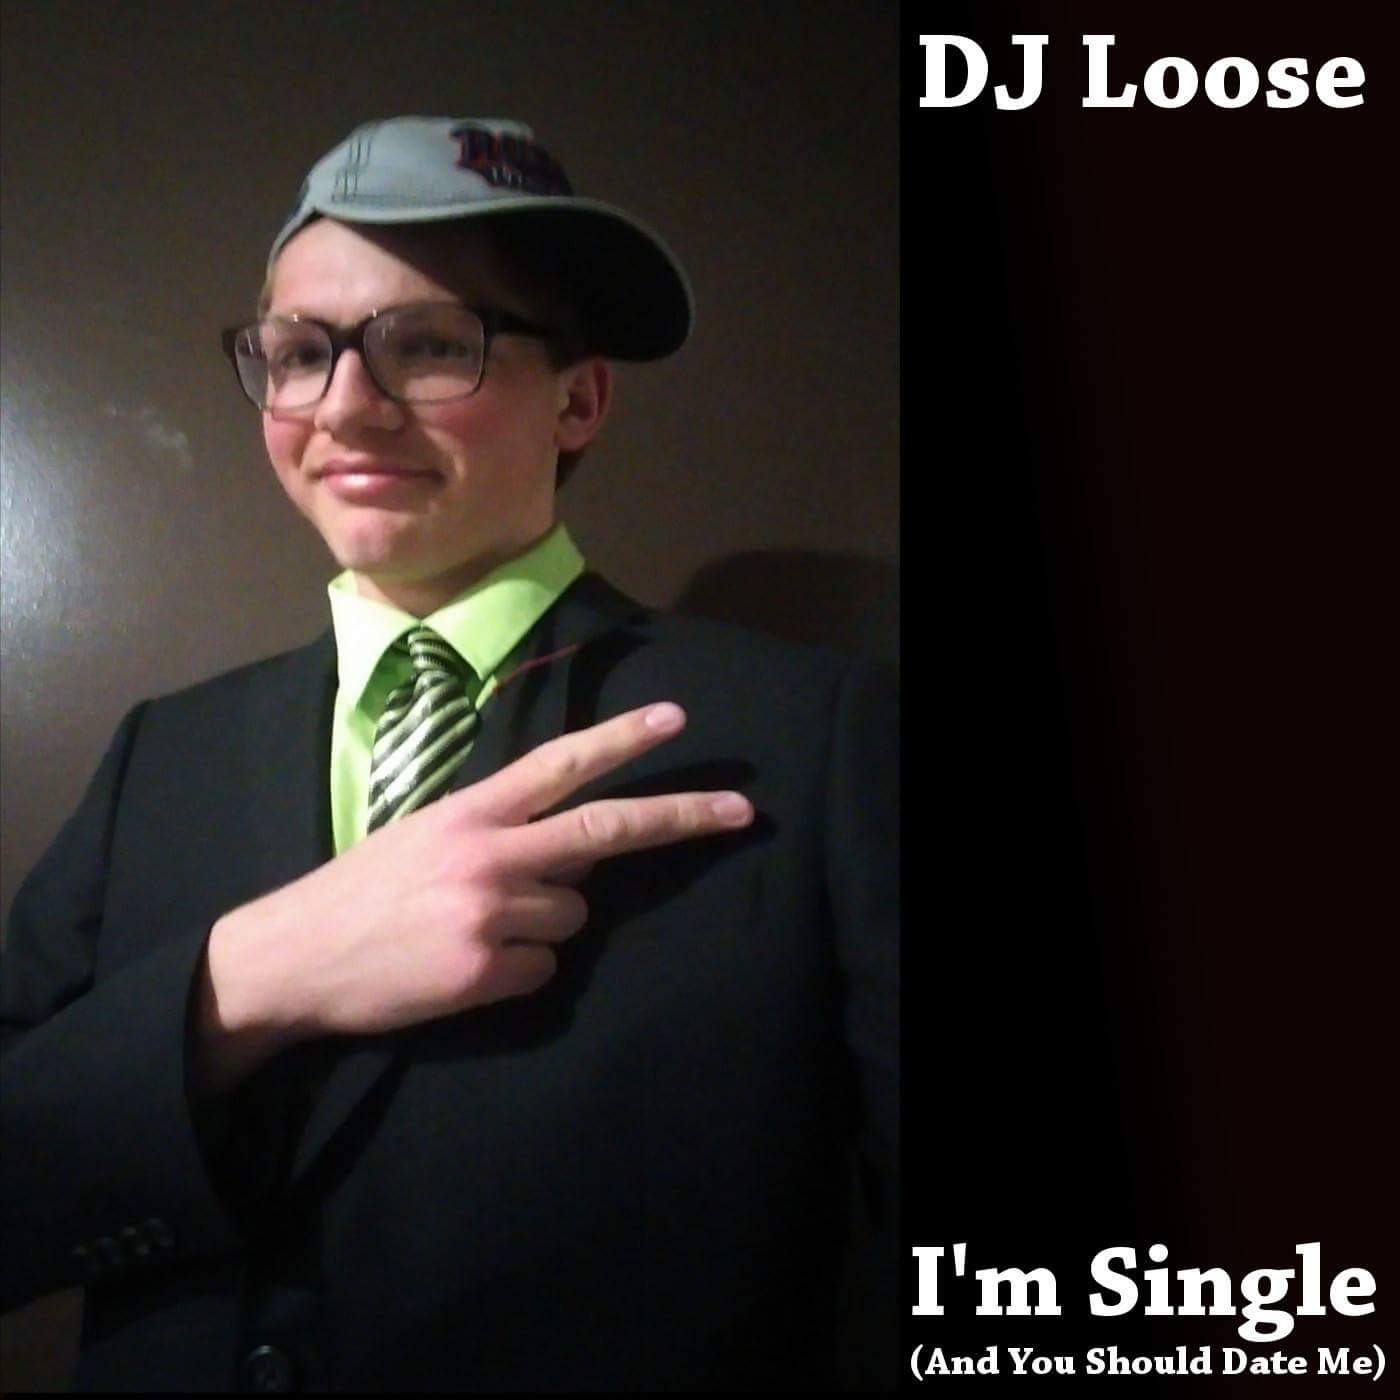 DJ Loose’s – I’m Single (And You Should Date Me)